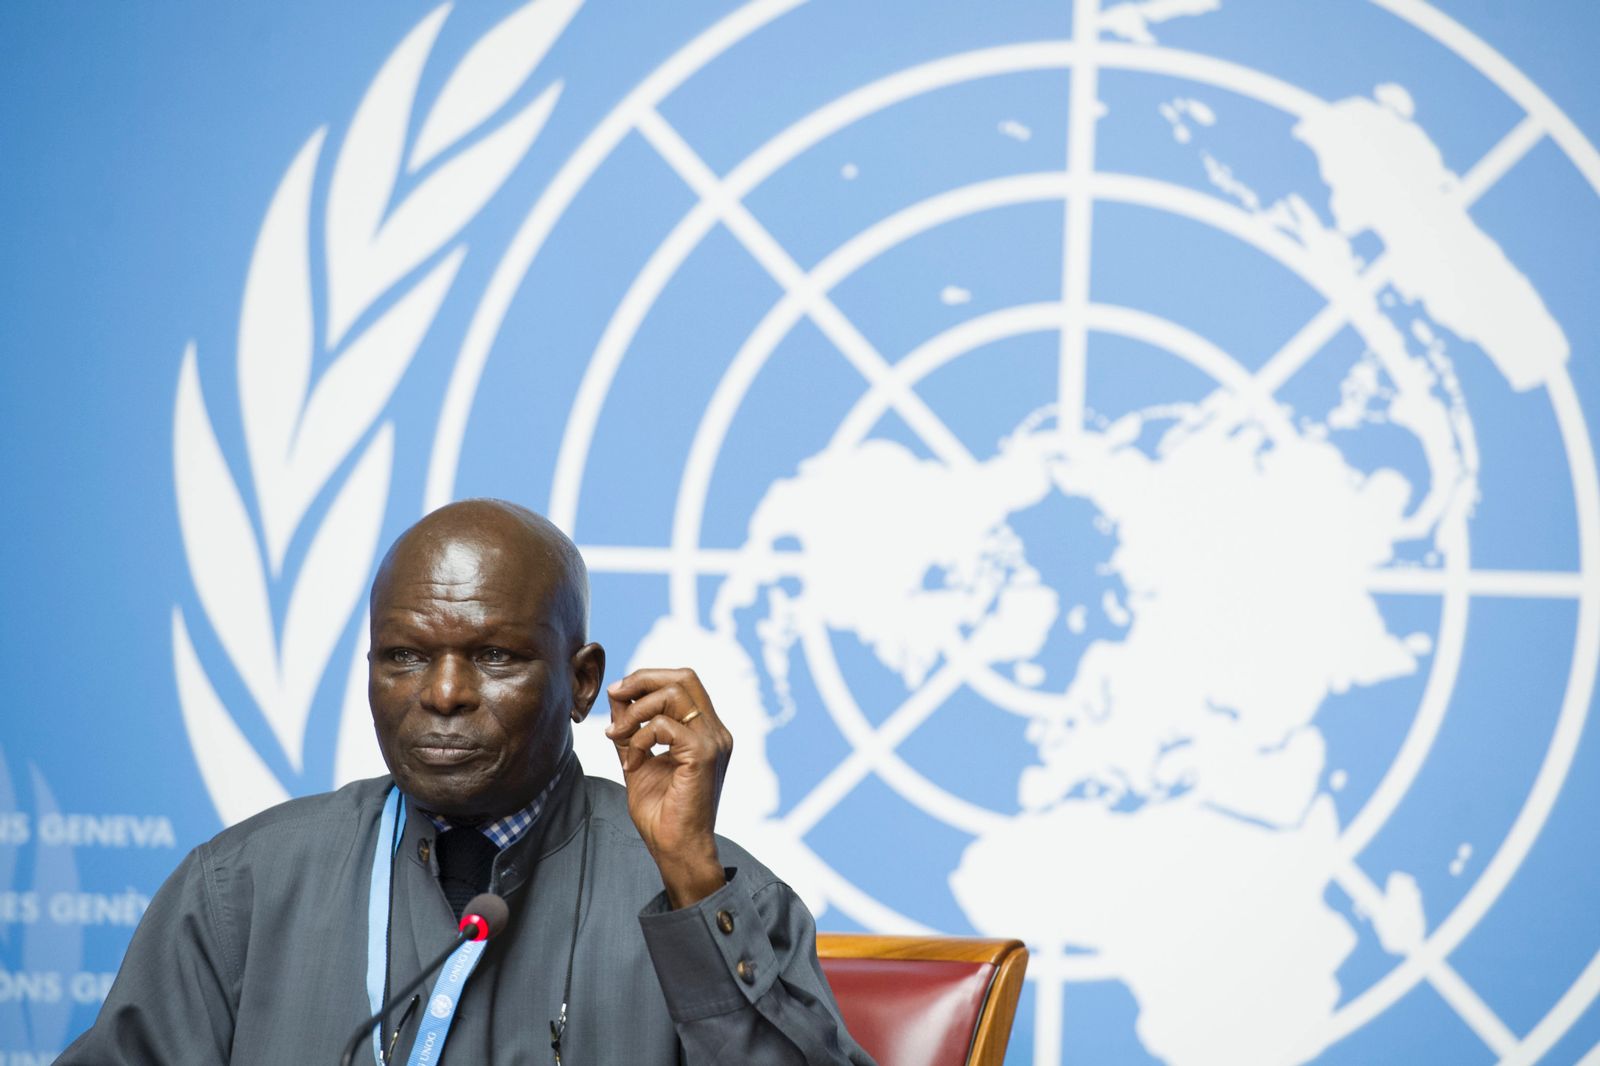 How do treaty bodies respond to situations of crisis such as Burundi?